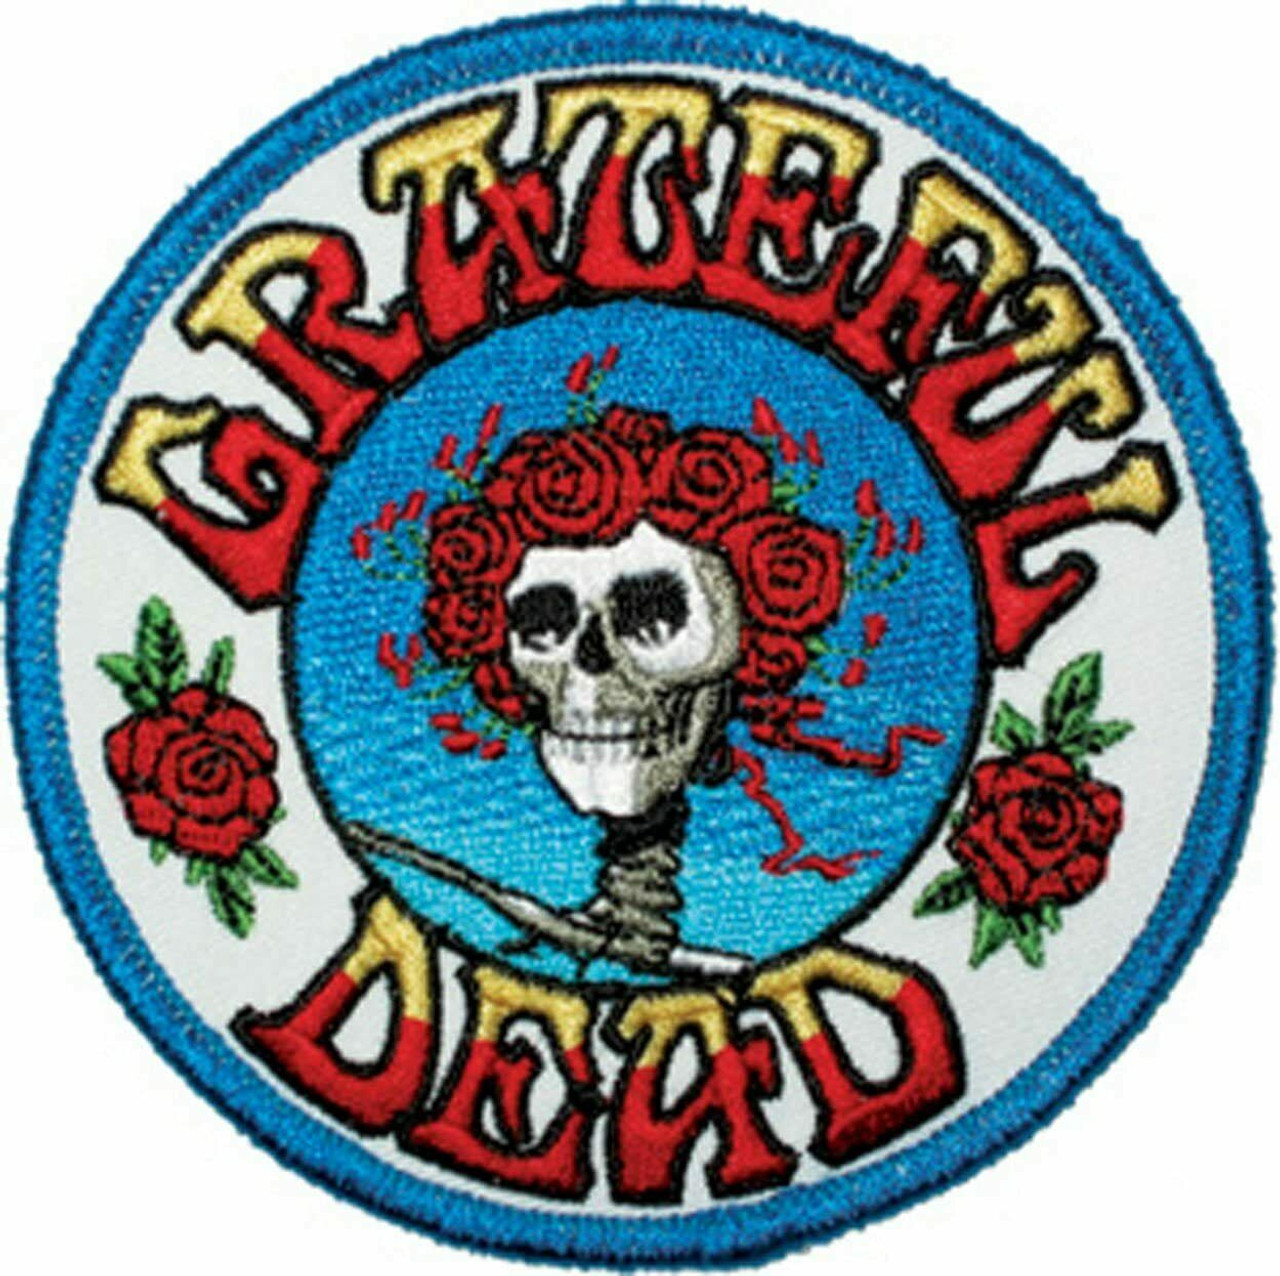 Grateful Dead on Twitter Forever Grateful  Thanks Peter Vauthy for  sharing your SKELETON AND ROSESinspired tattoo Are you the ultimate Dead  Head Tag photos of your Grateful Dead ink using GratefulDeadTattoo